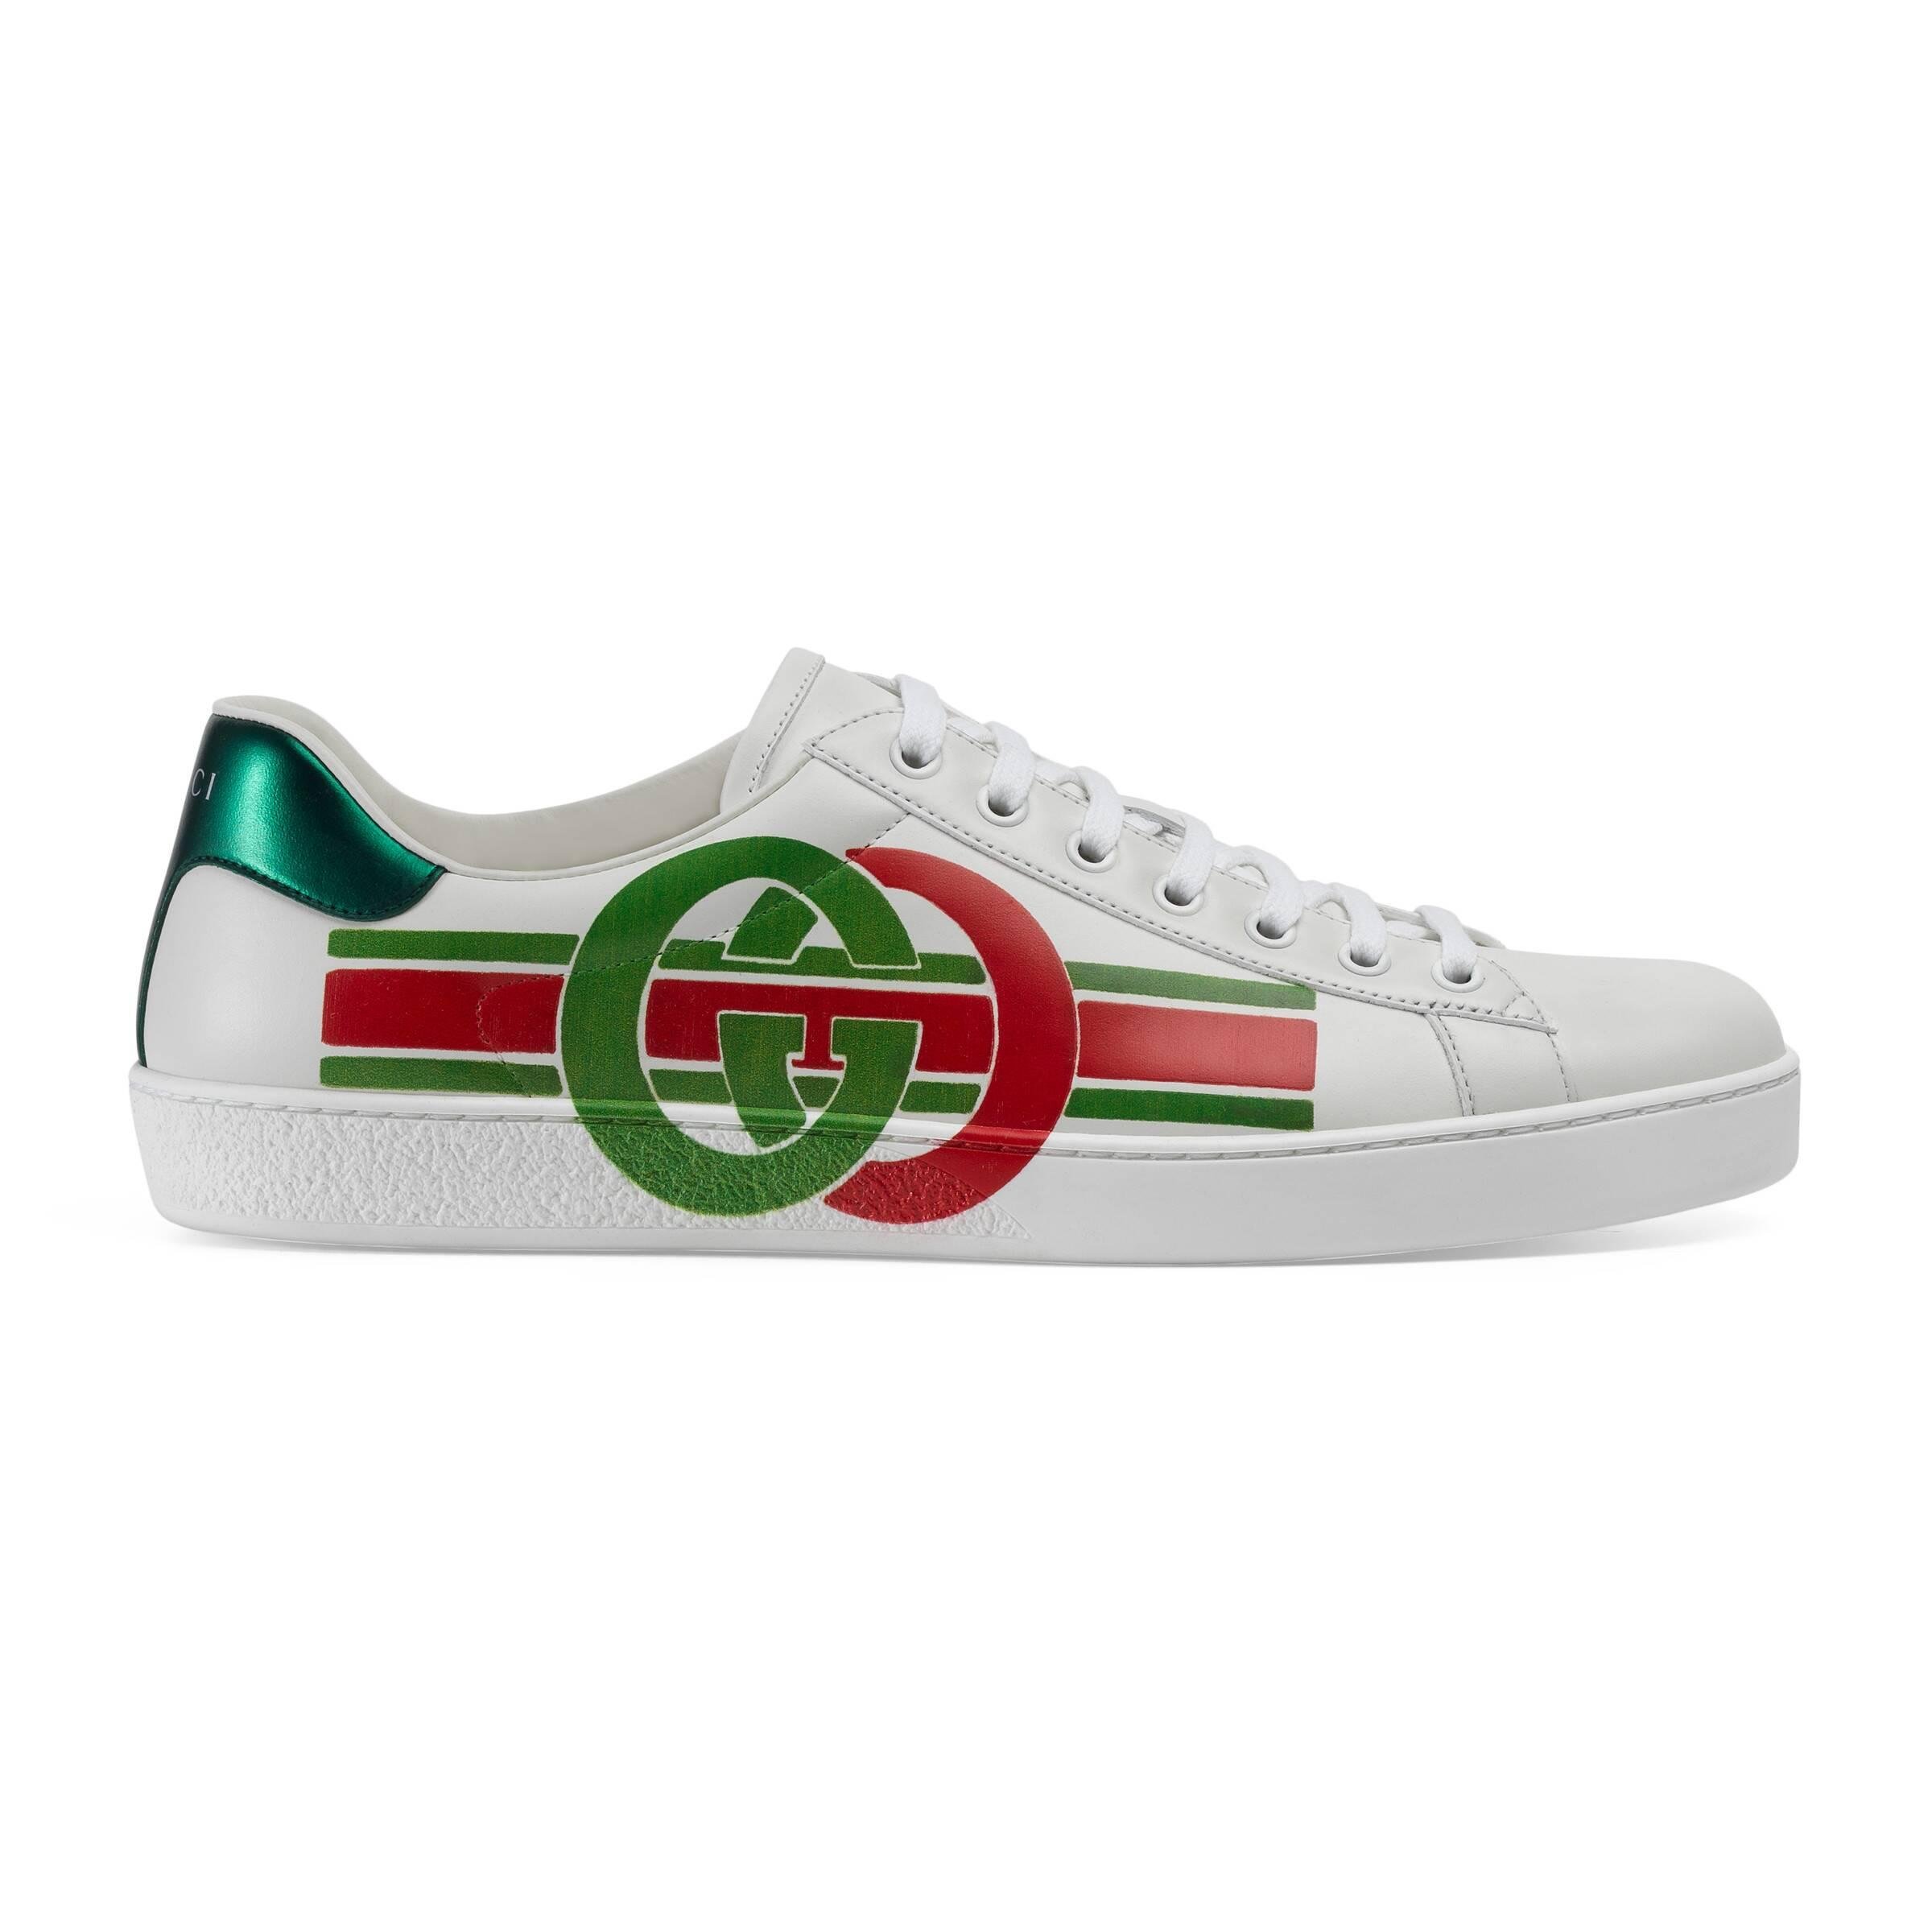 green and red gucci shoes